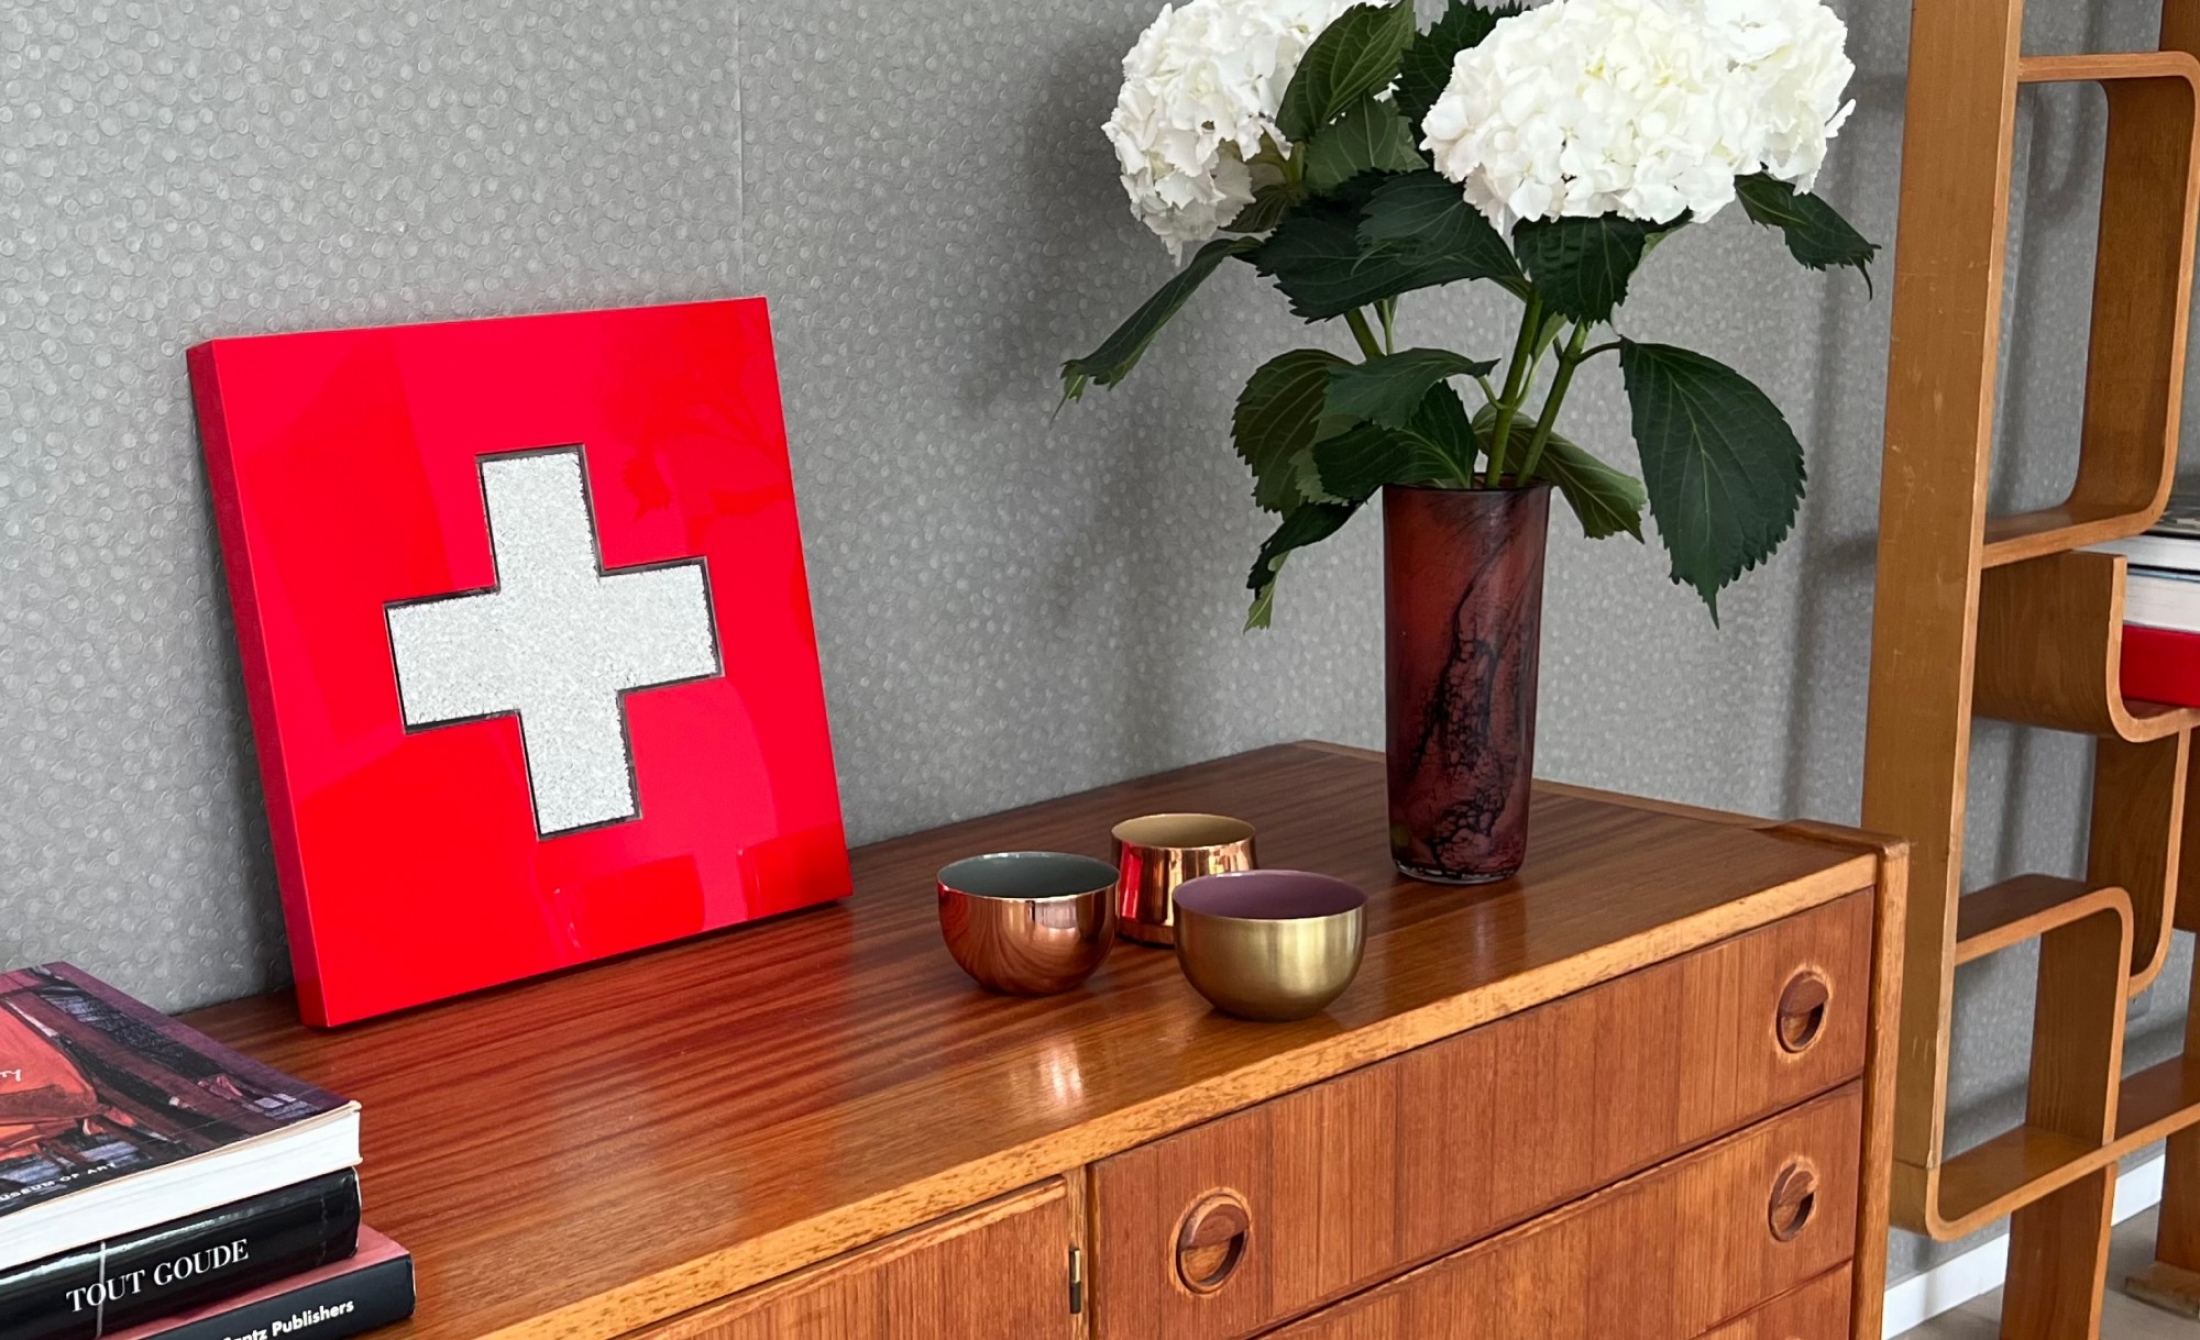 THE SWISS RECYCLED FLAG: TREAT YOURSELF TO A UNIQUE WORK